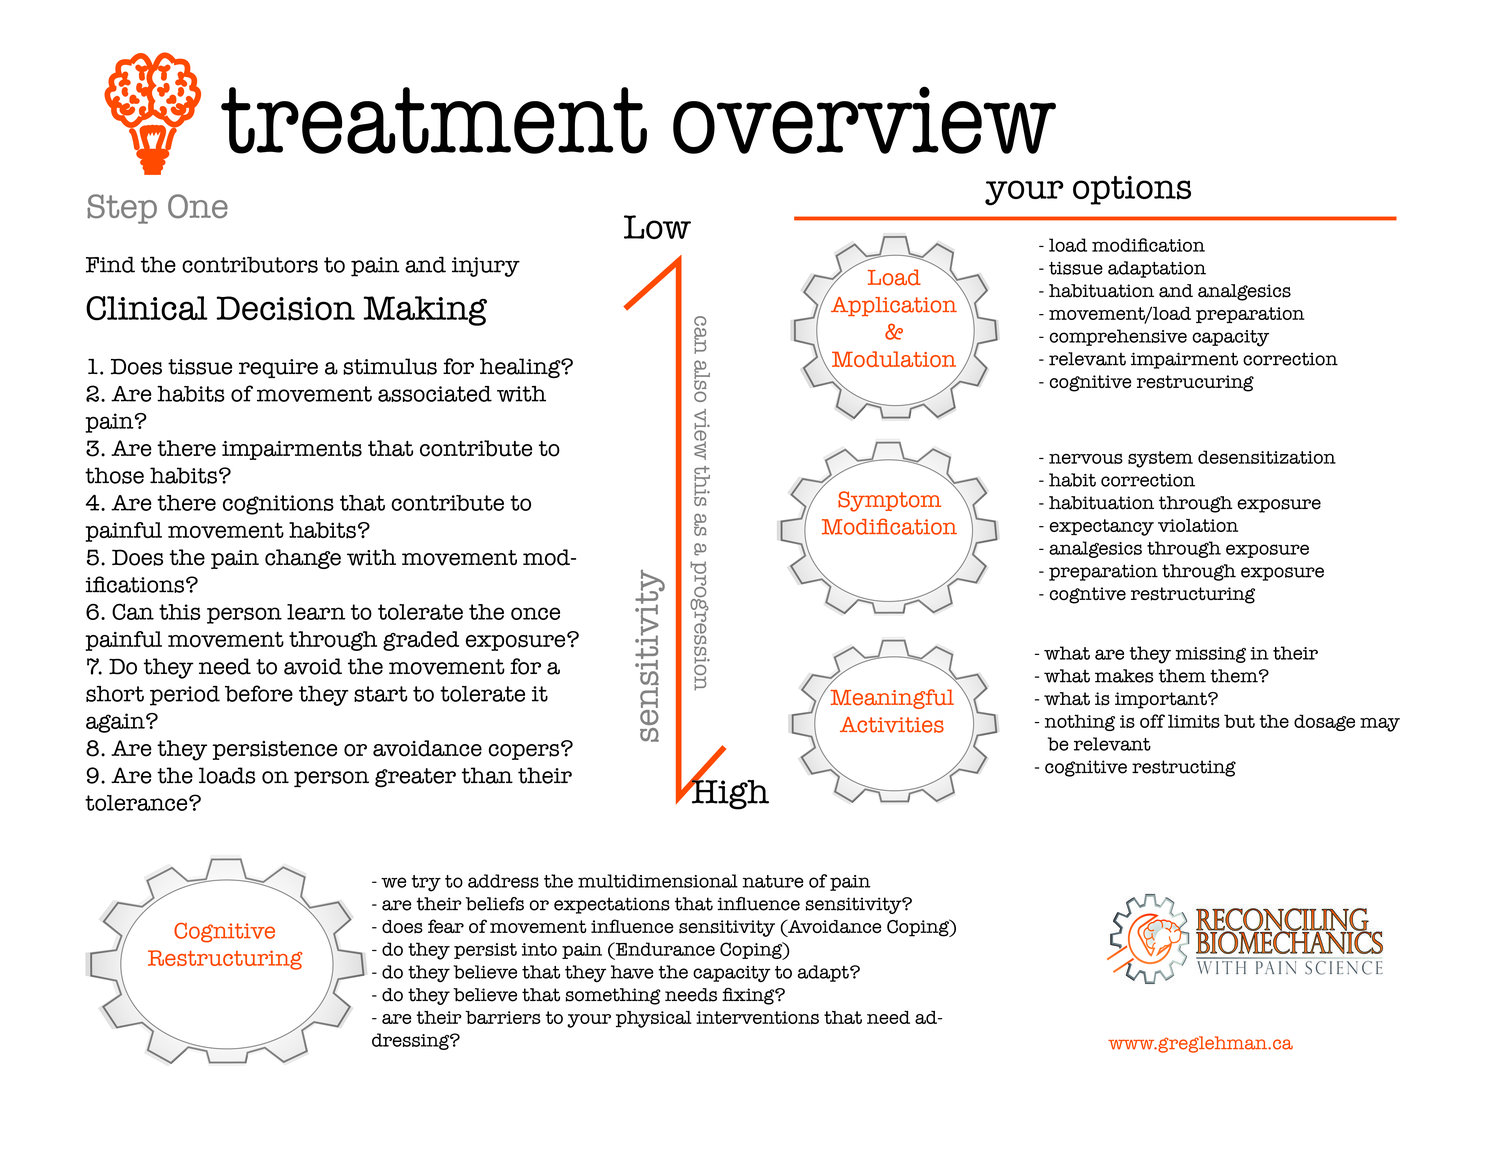 treatment overview details and CDM .jpg